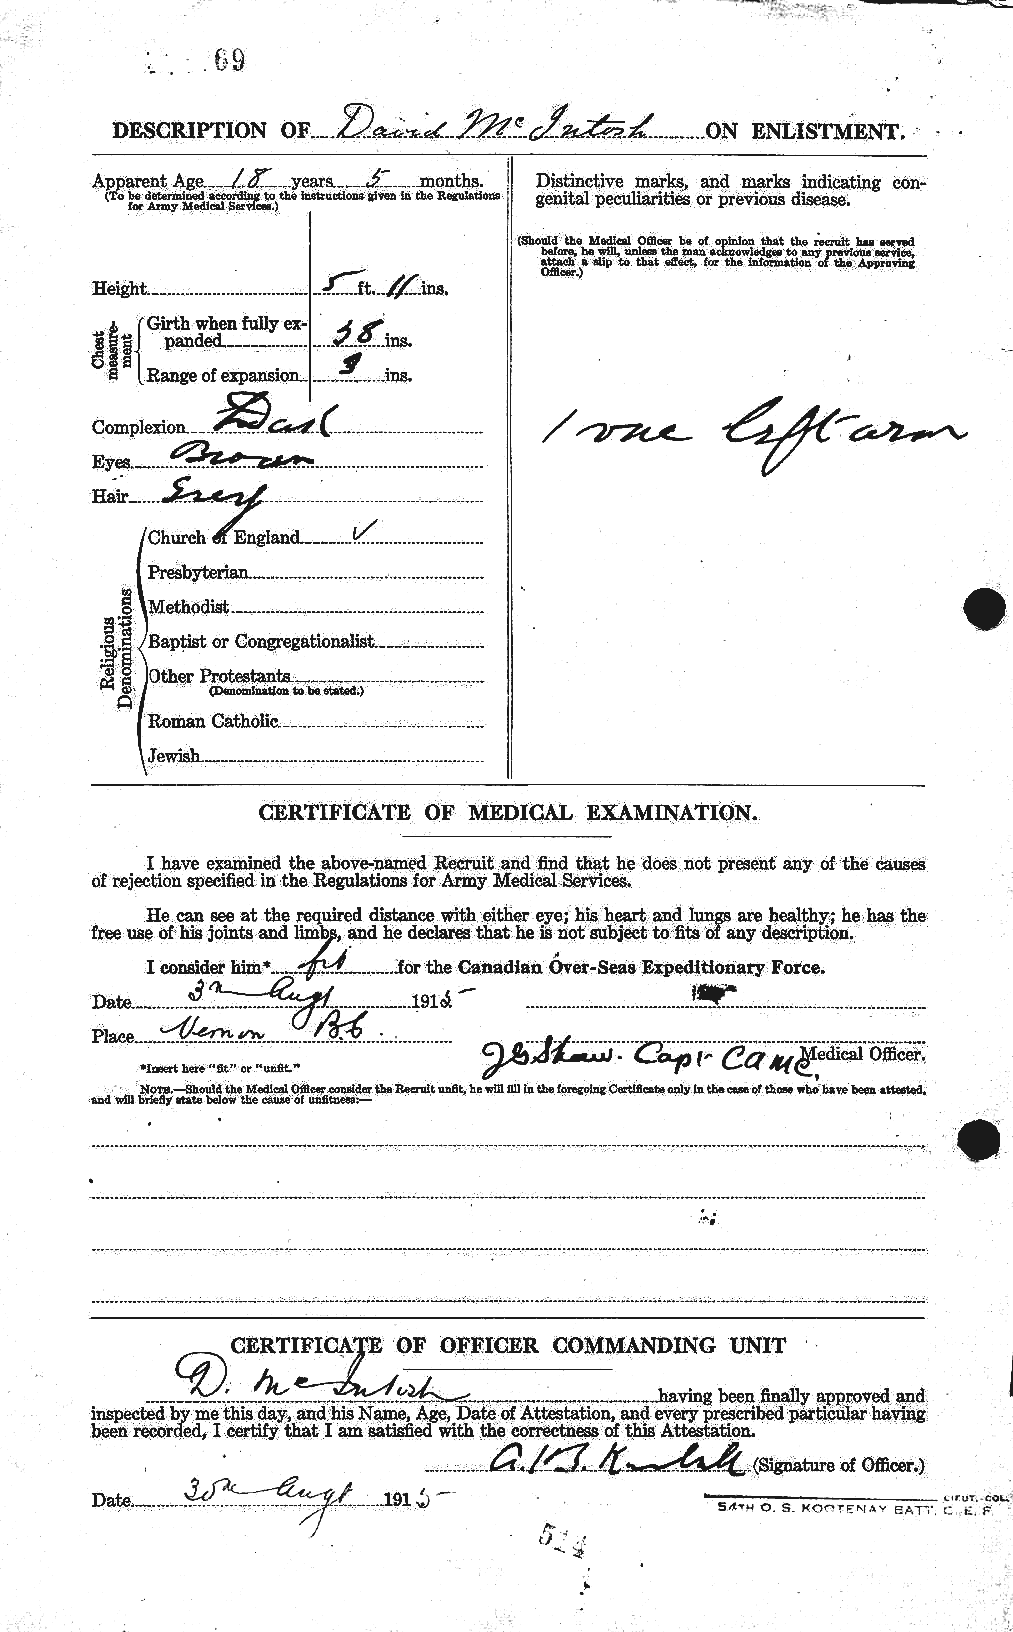 Personnel Records of the First World War - CEF 525629b